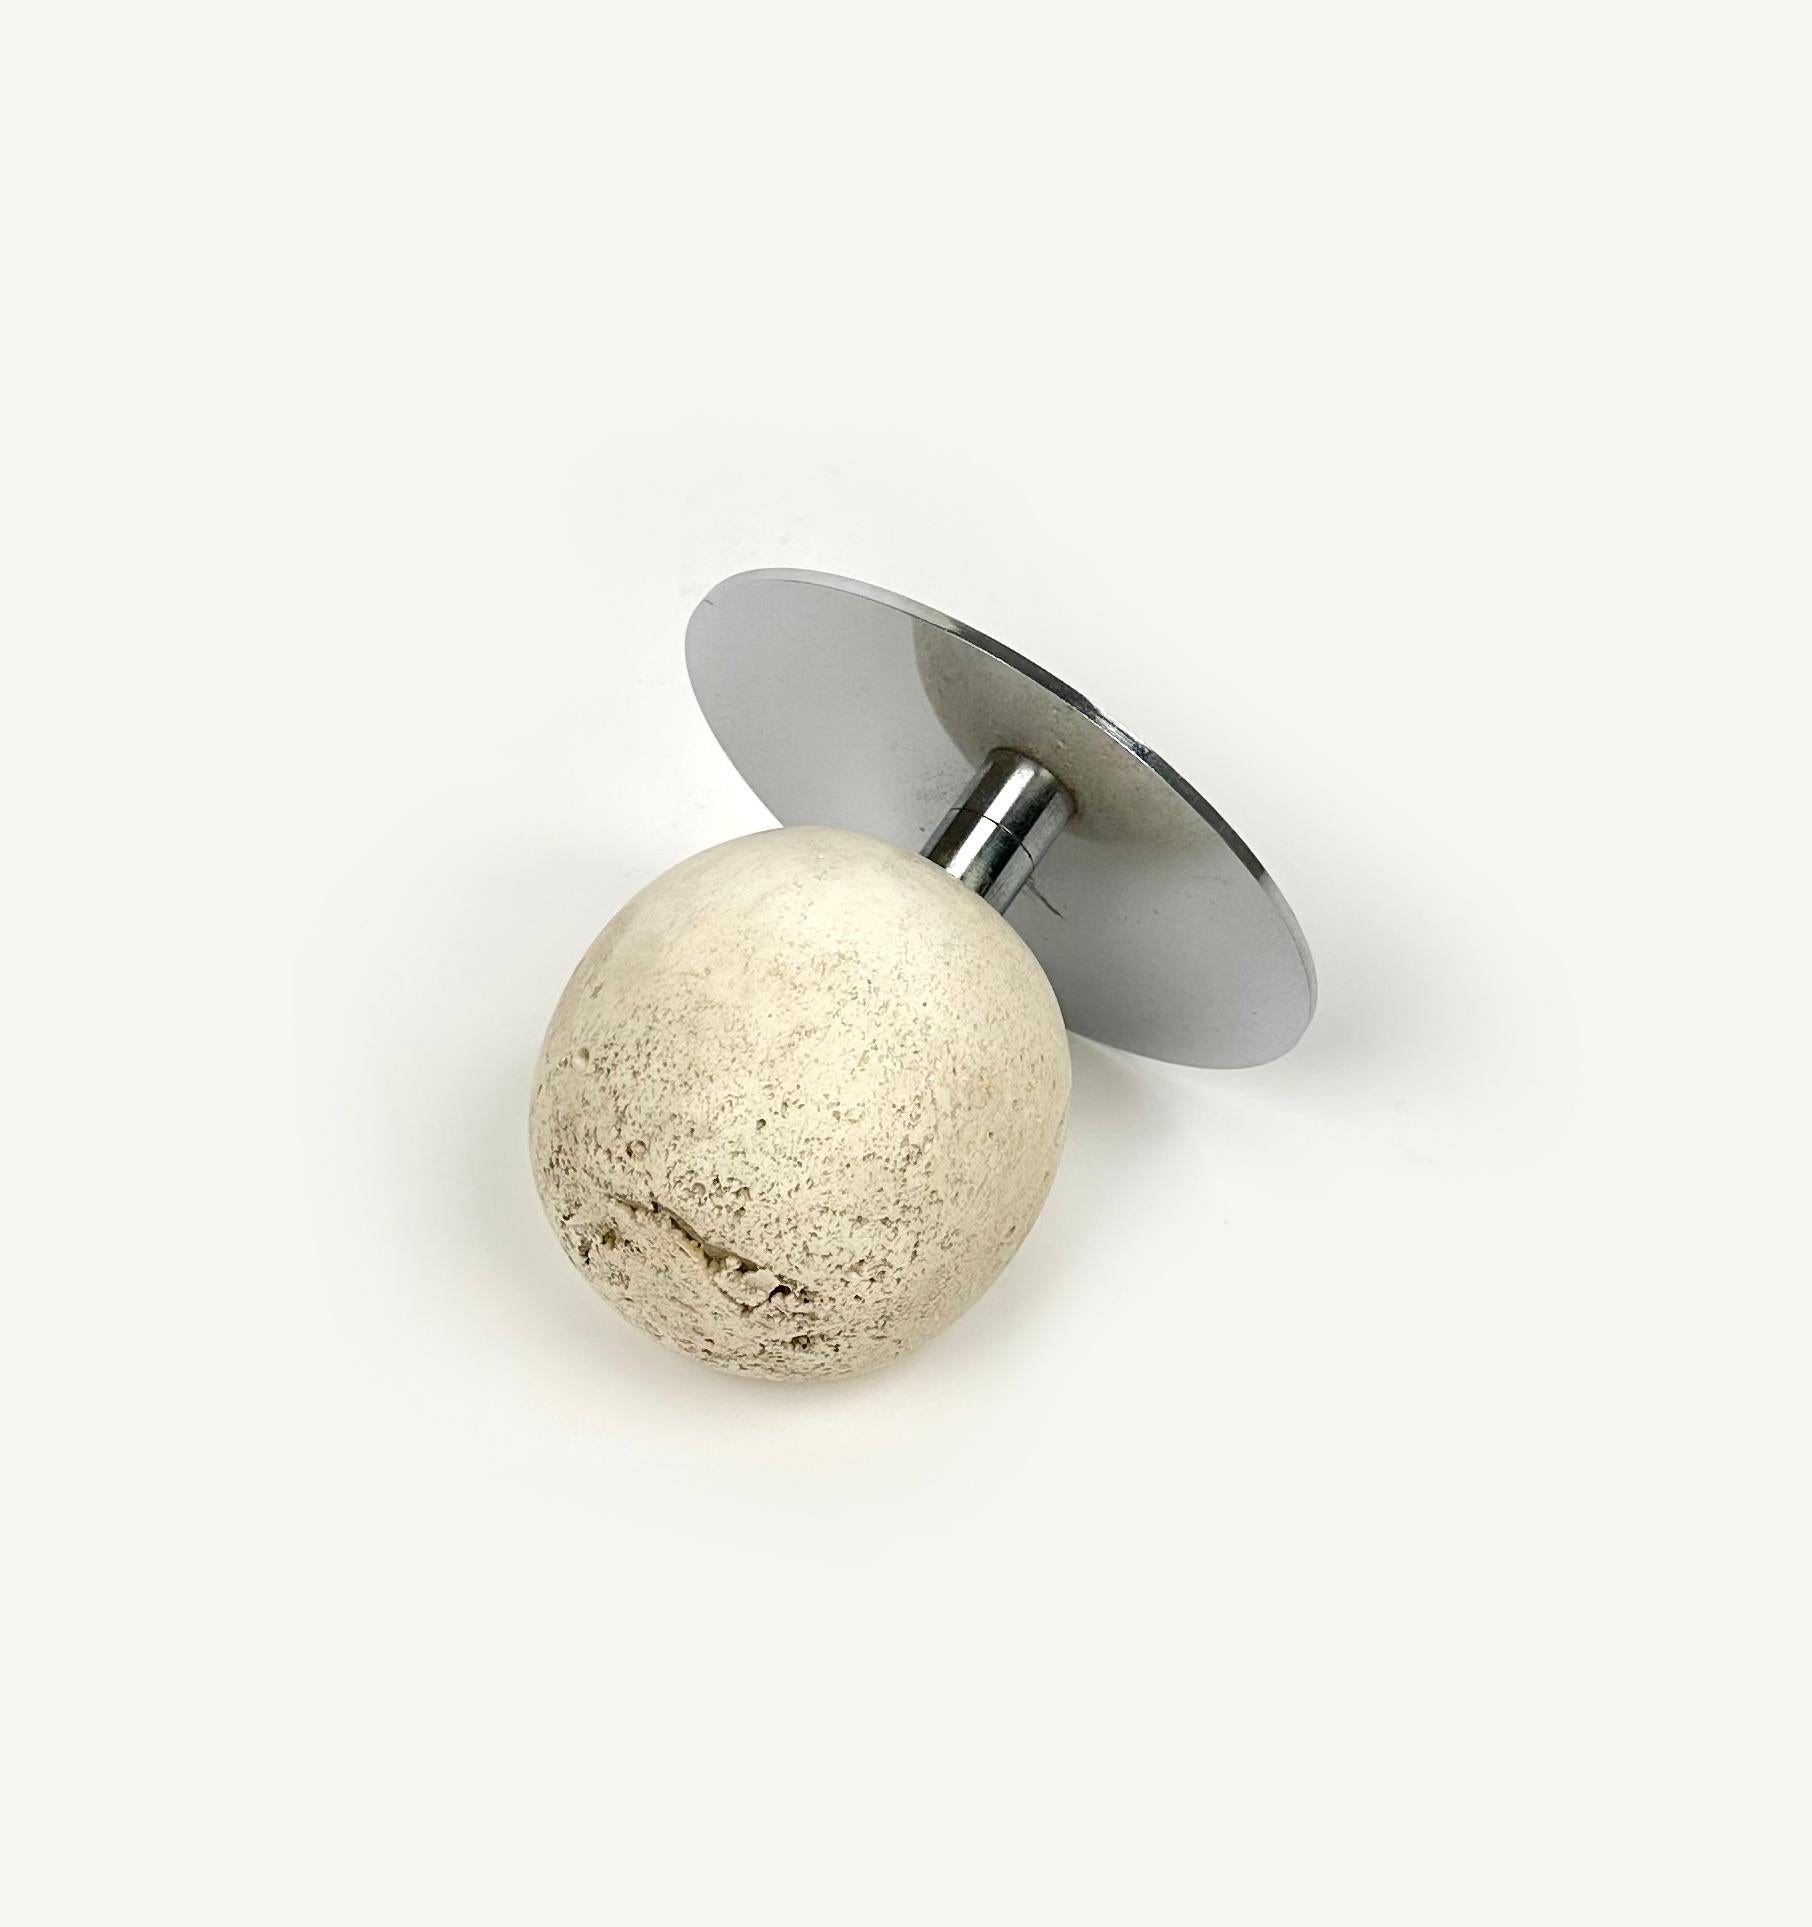 Late 20th Century Mid-Century Ball Sculpture Paperweight in Steel and Travertine, Italy, 1970s For Sale